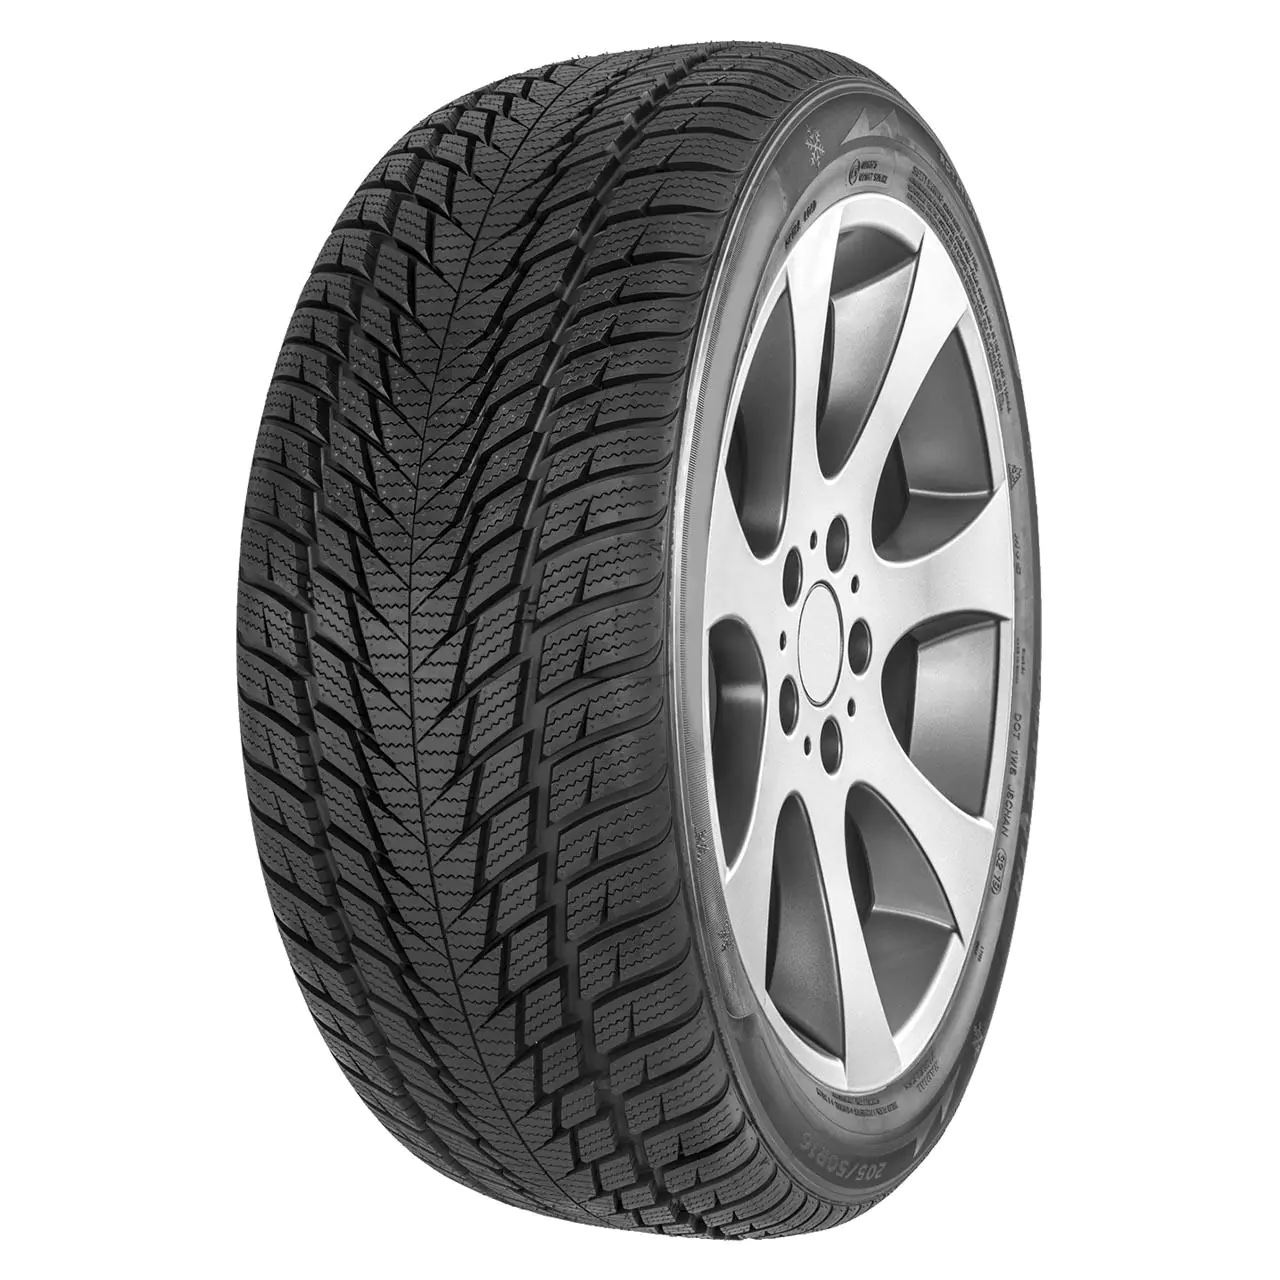 Gomme 4x4 Suv Fortuna 235/50 R19 103V GOWIN UHP3 XL M+S Invernale